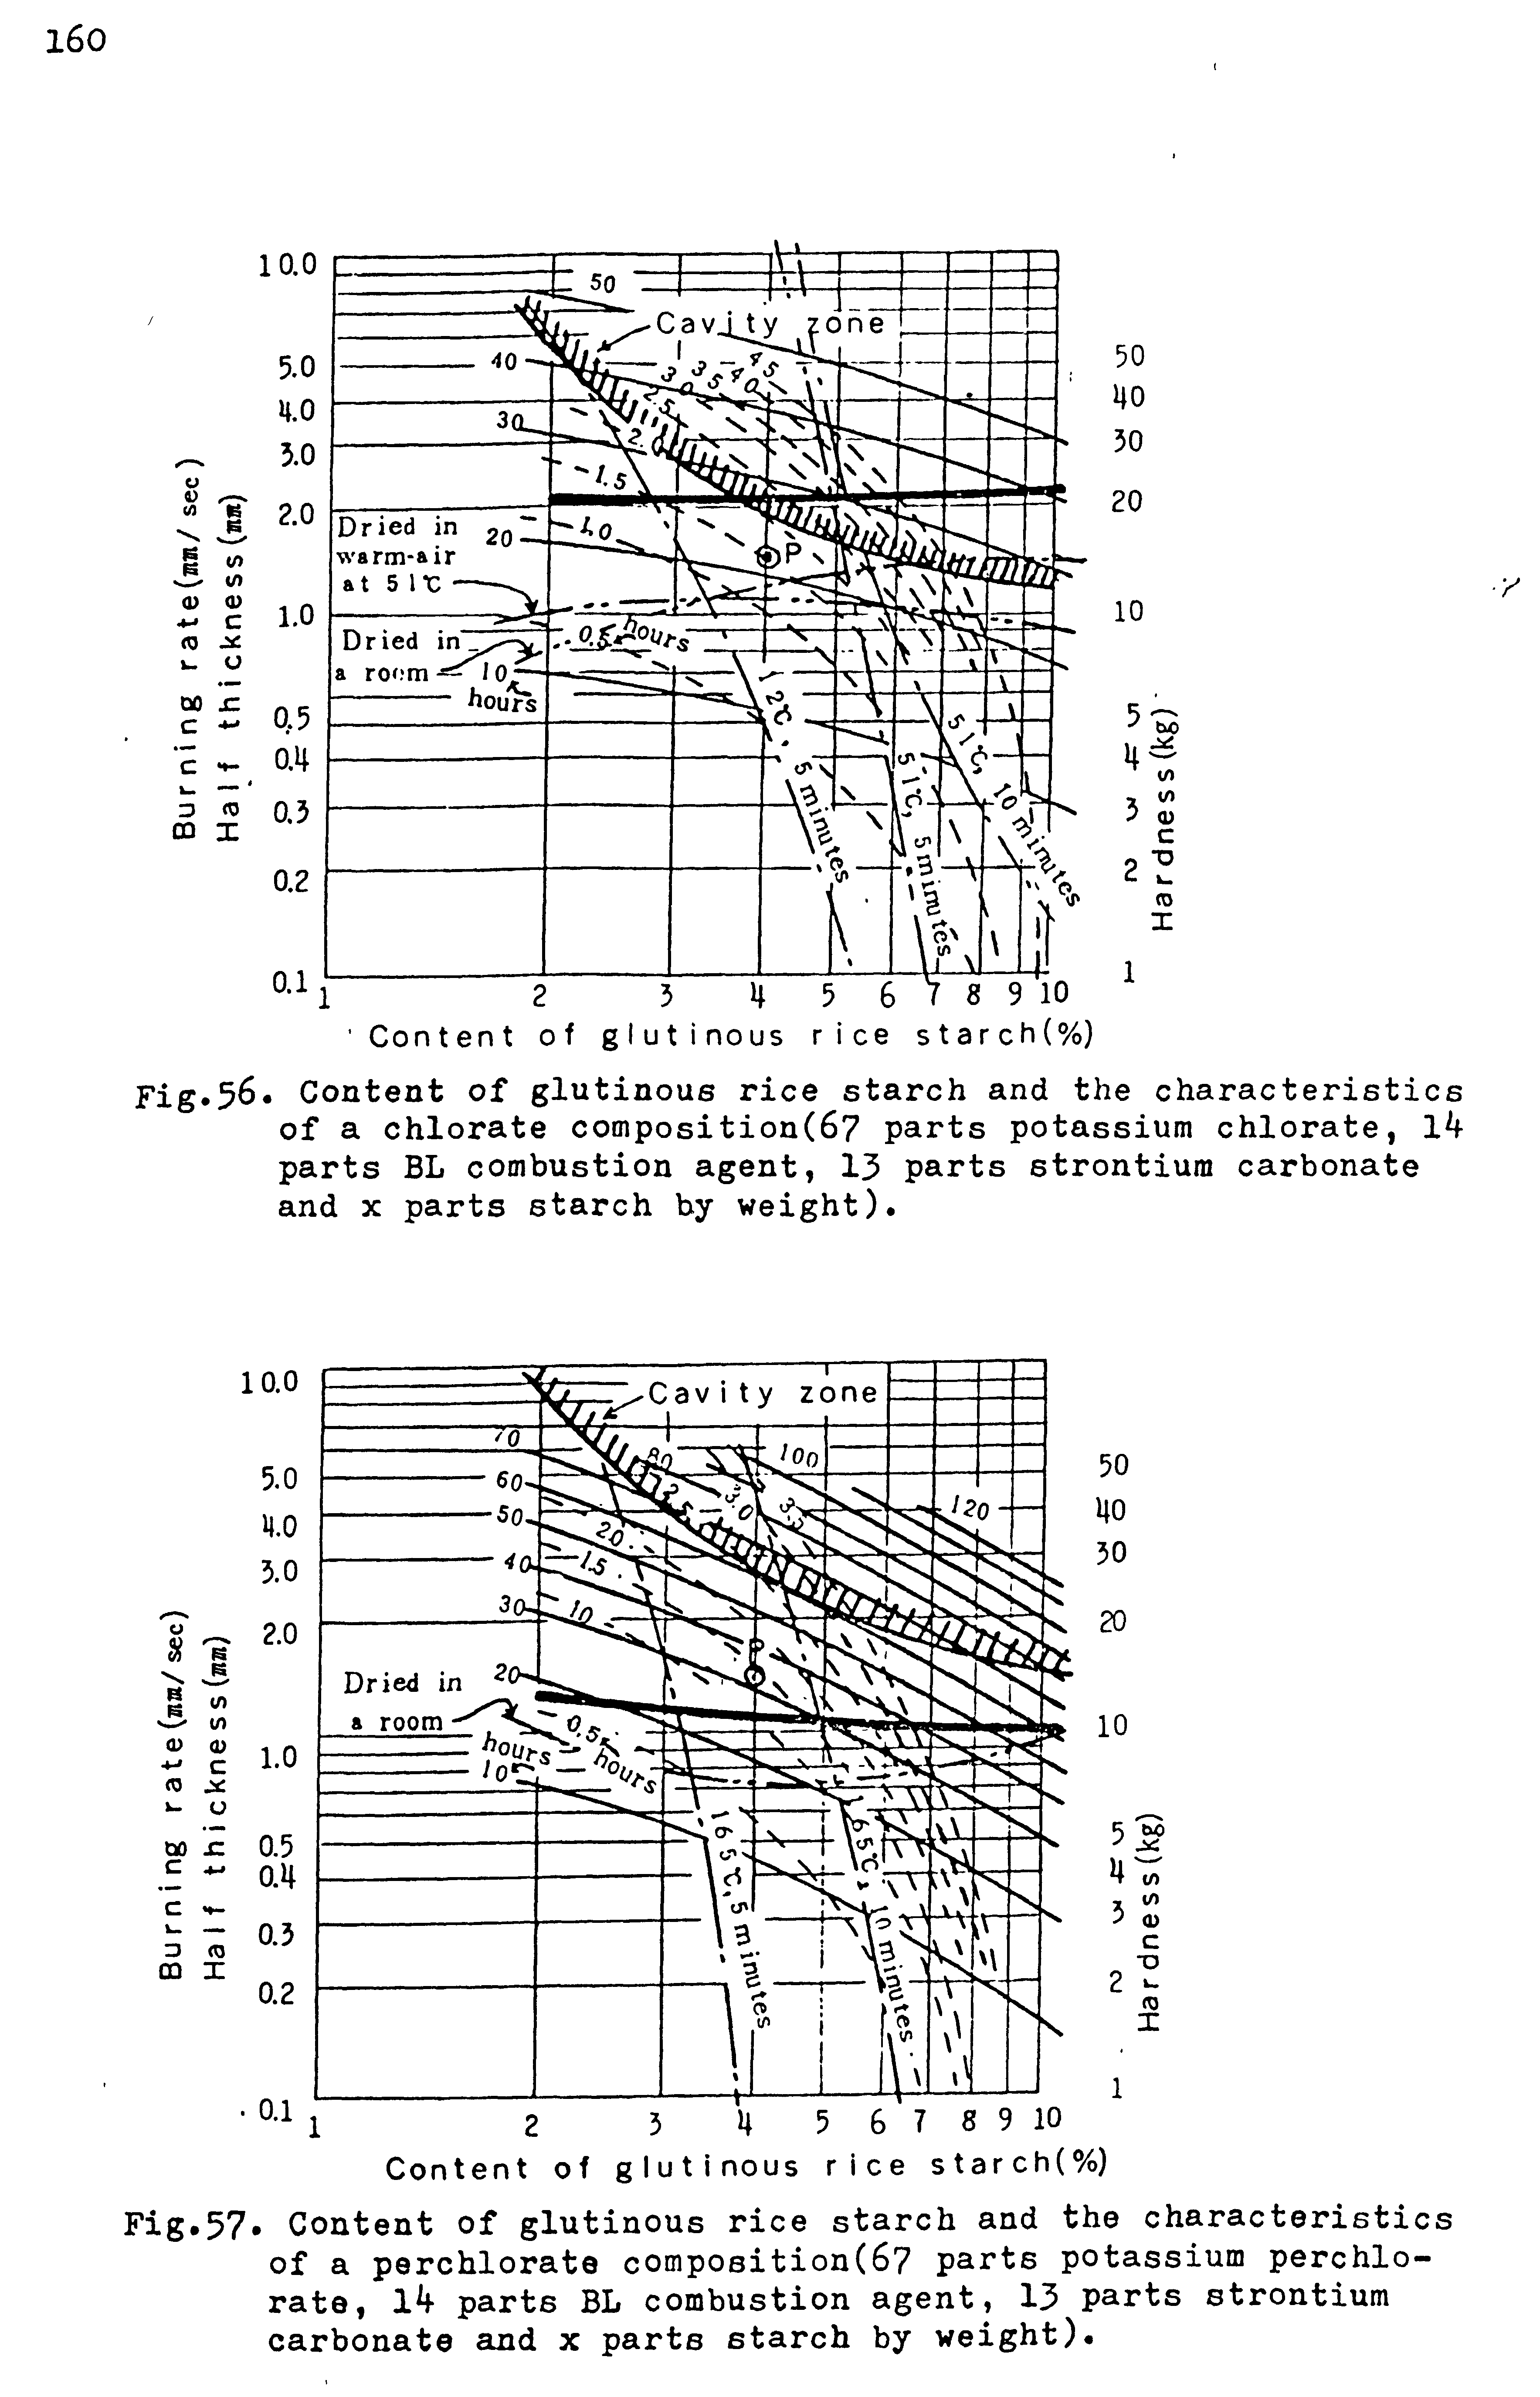 Fig.56 Content of glutinous rice starch and the characteristics of a chlorate composition(67 parts potassium chlorate, Ik parts BL combustion agent, 13 parts strontium carbonate and X parts starch by weight).